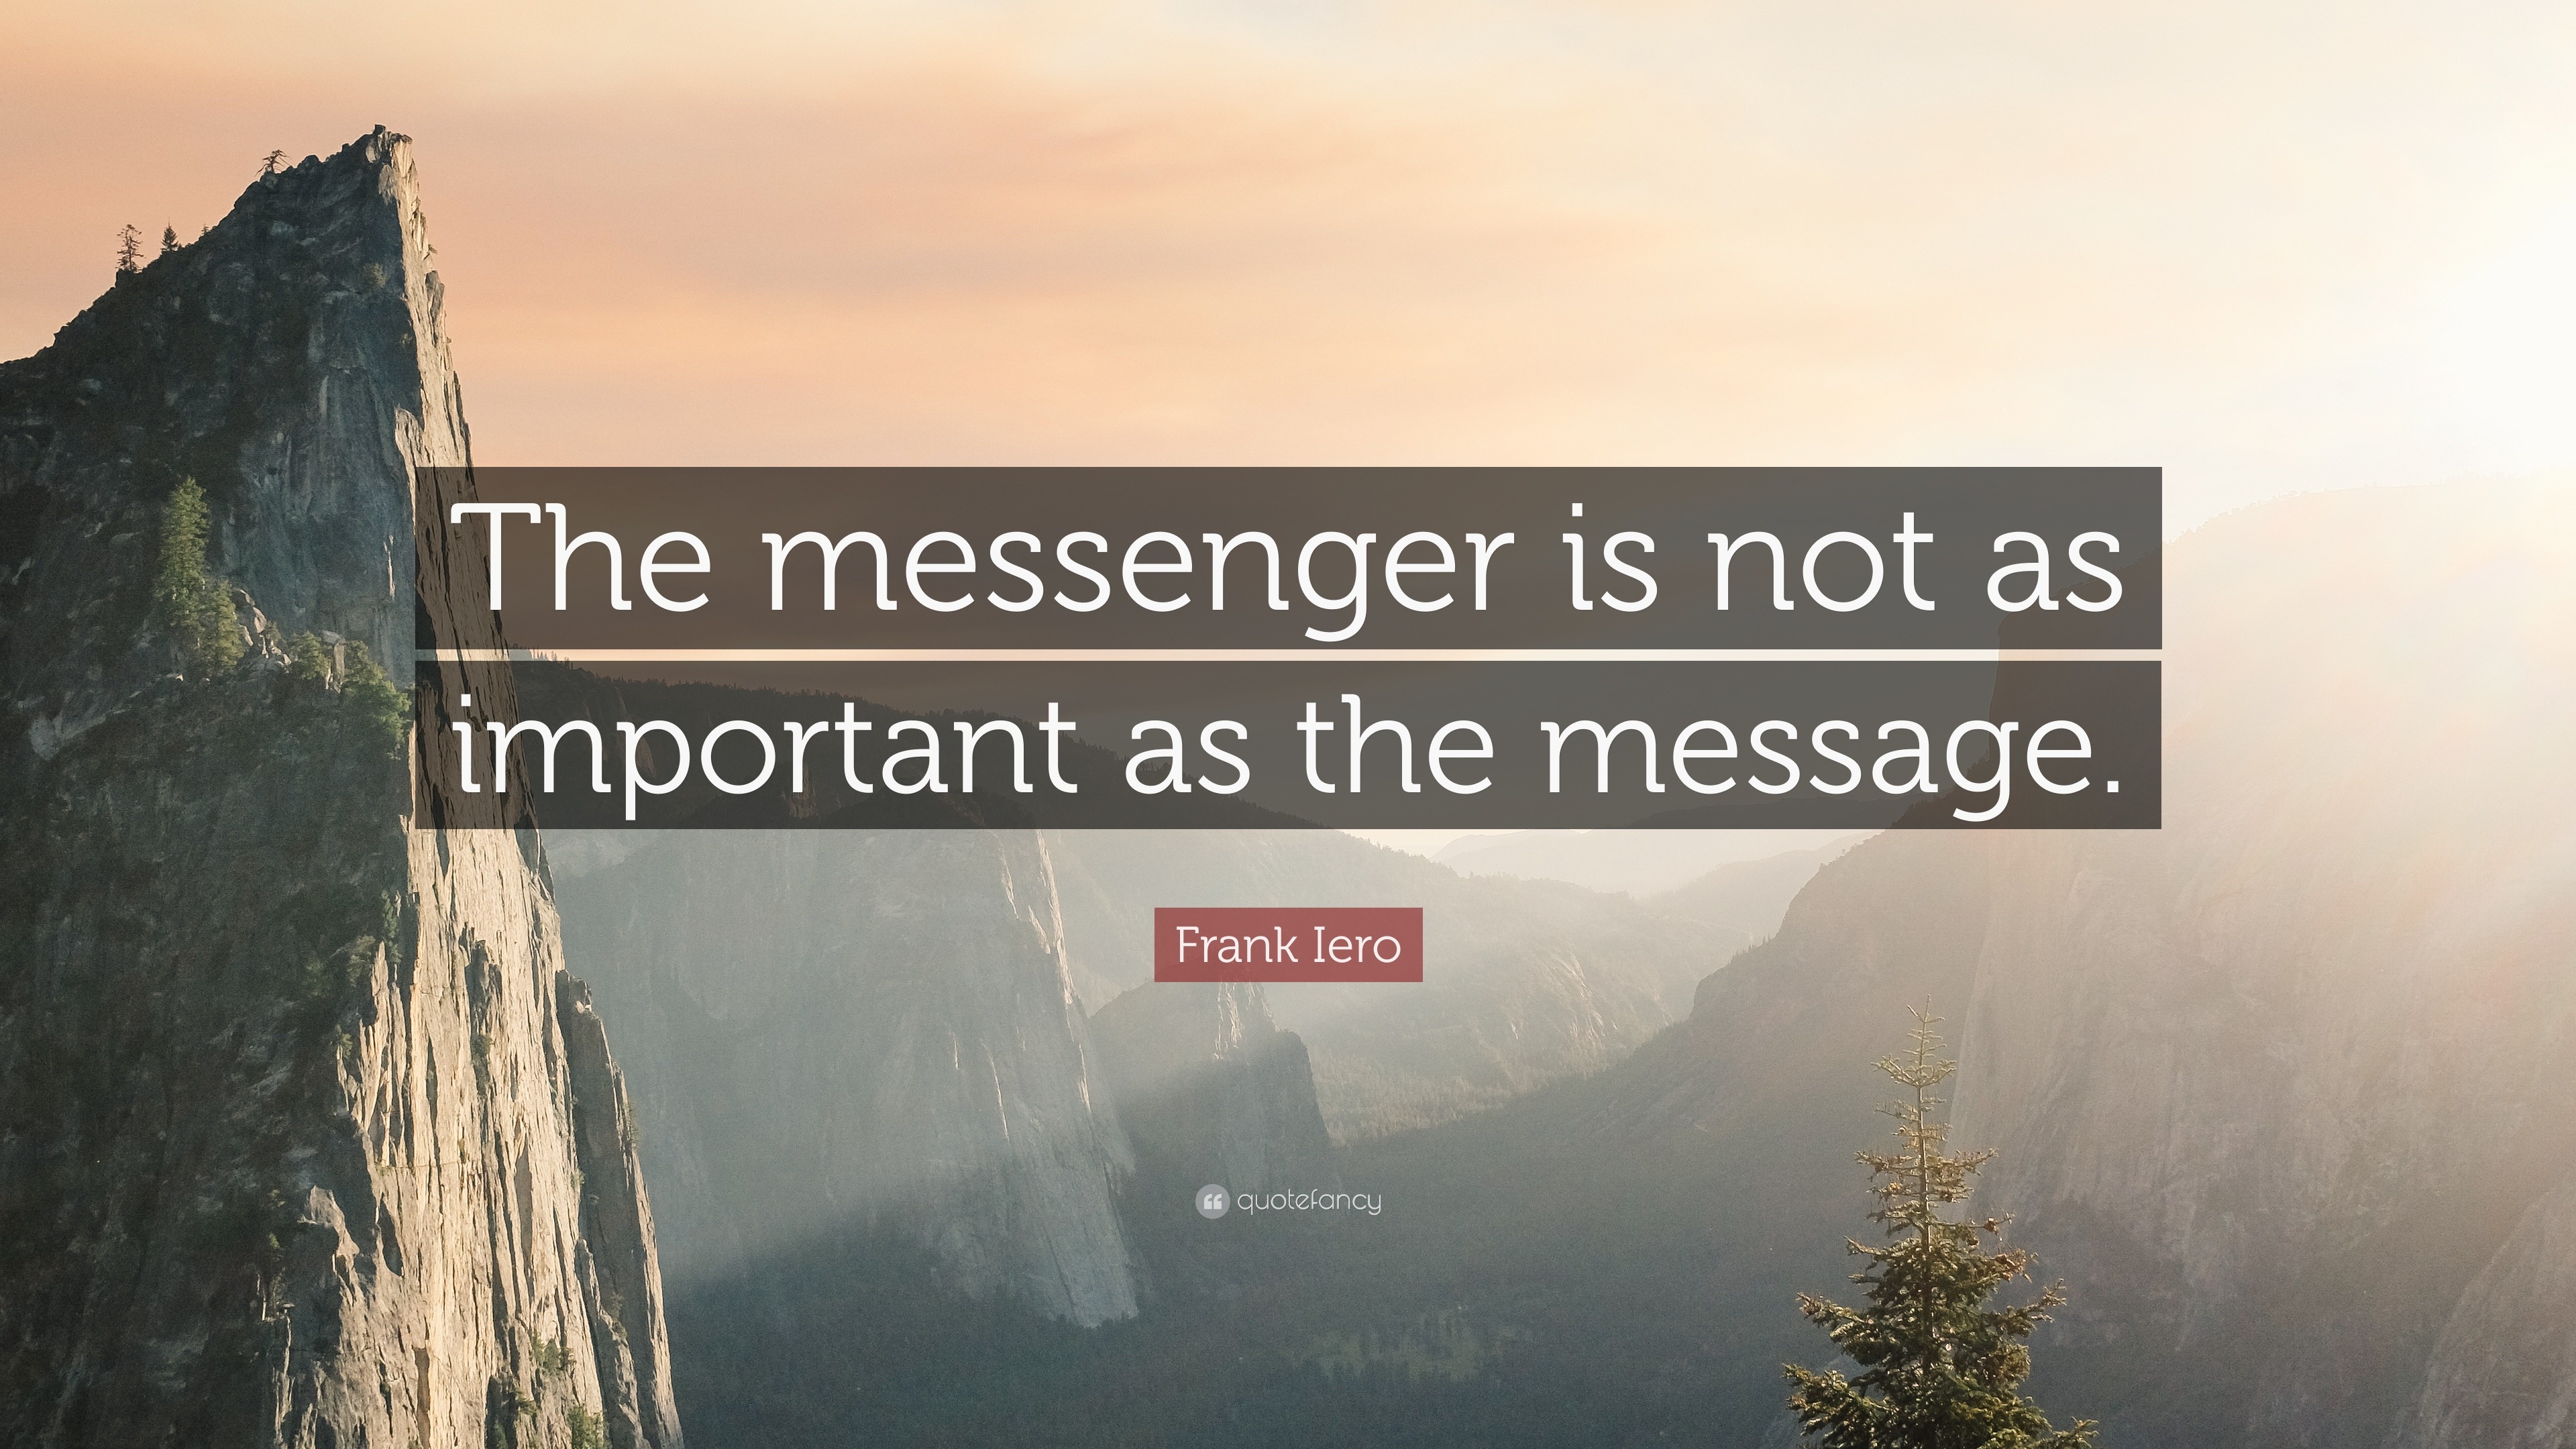 Frank Iero Quote: “The messenger is not as important as the message.”